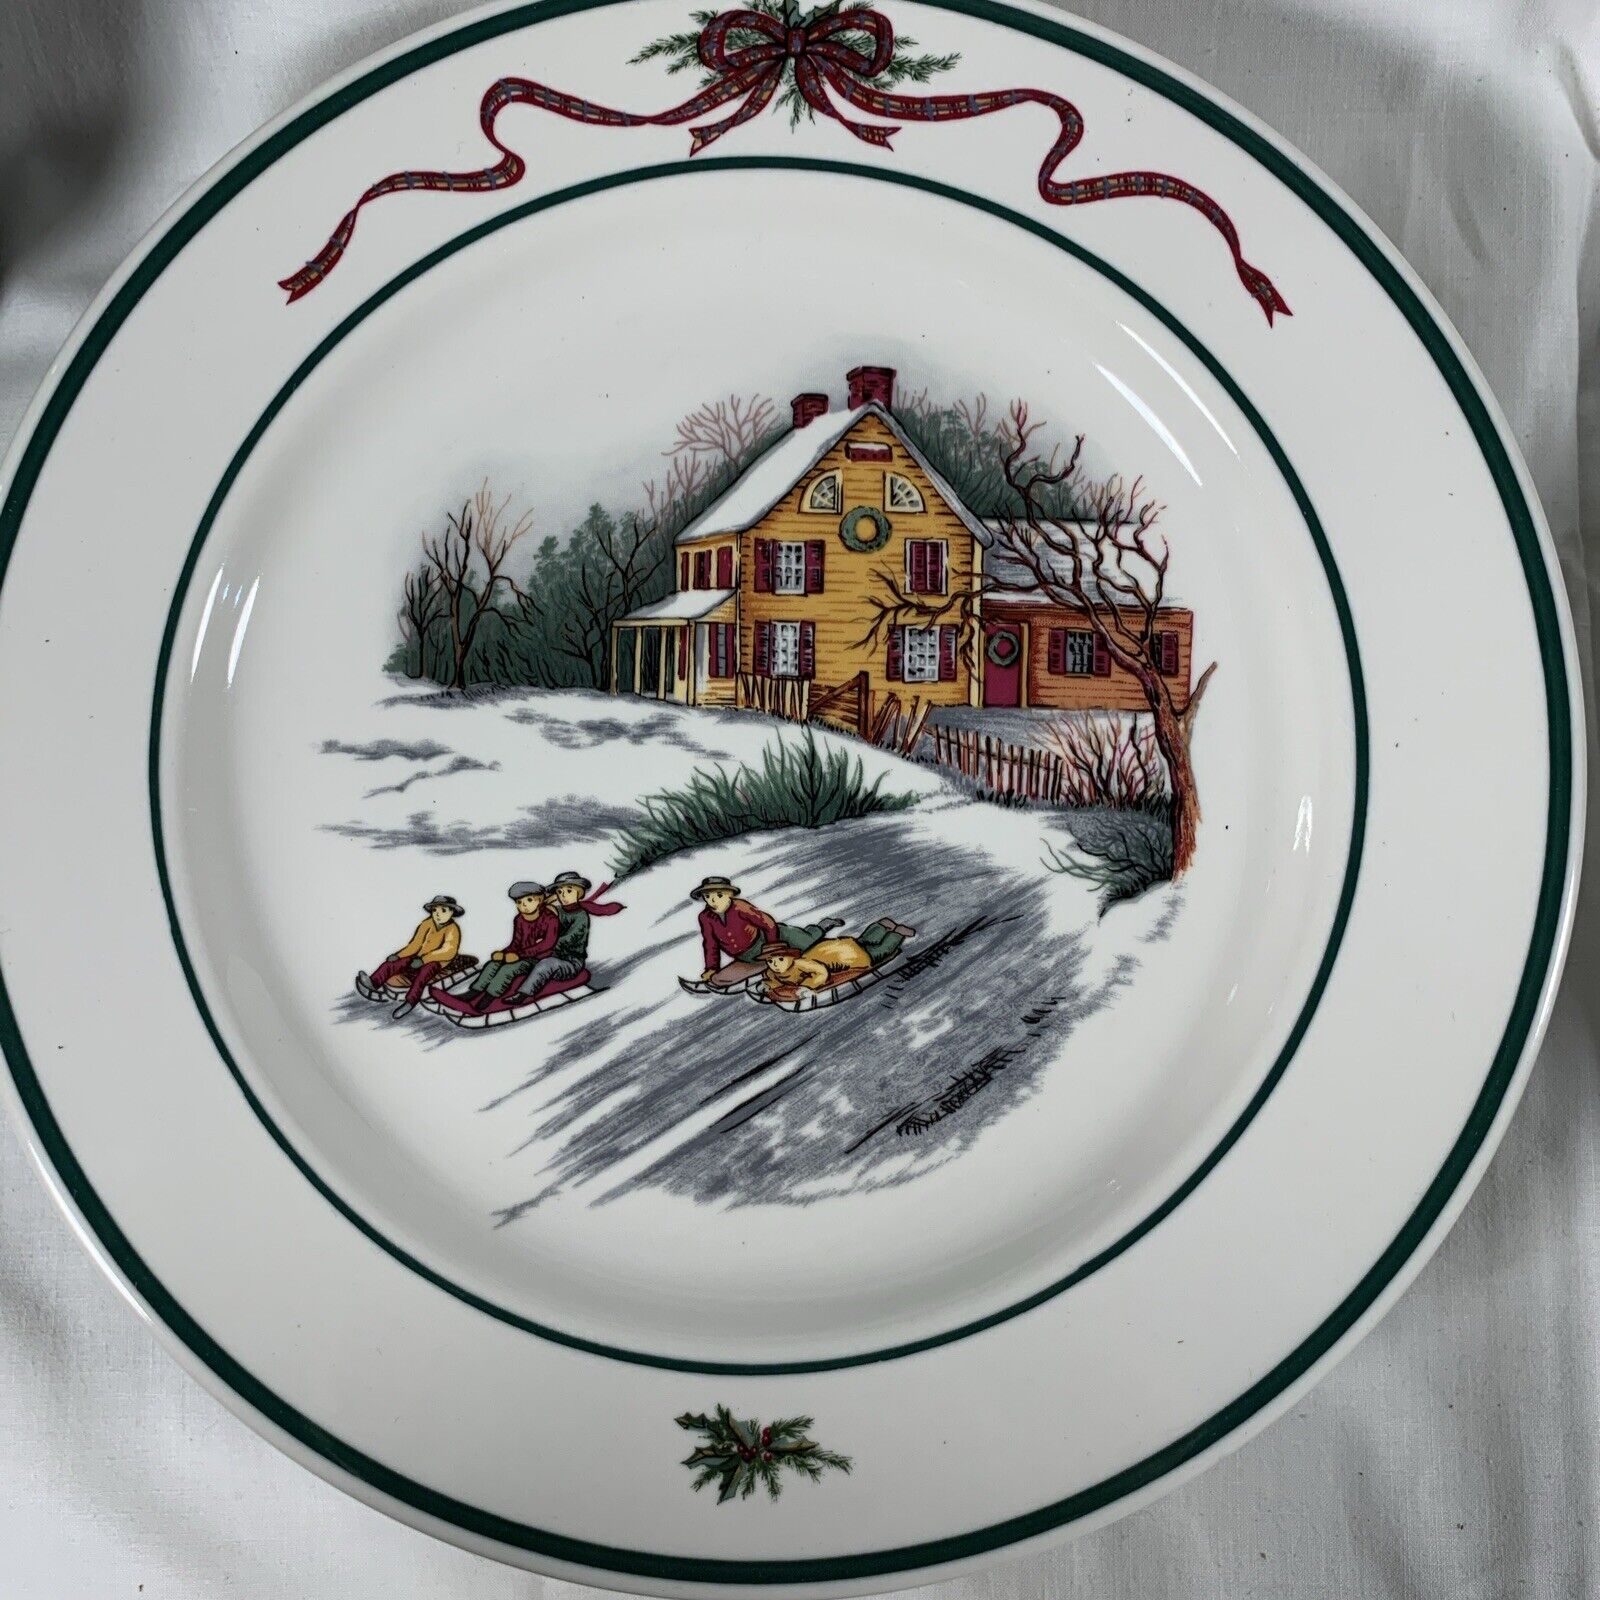 Vintage Christmas/Holiday Scenes - The Cellar Ceramic/Porcelain Plate - Retired